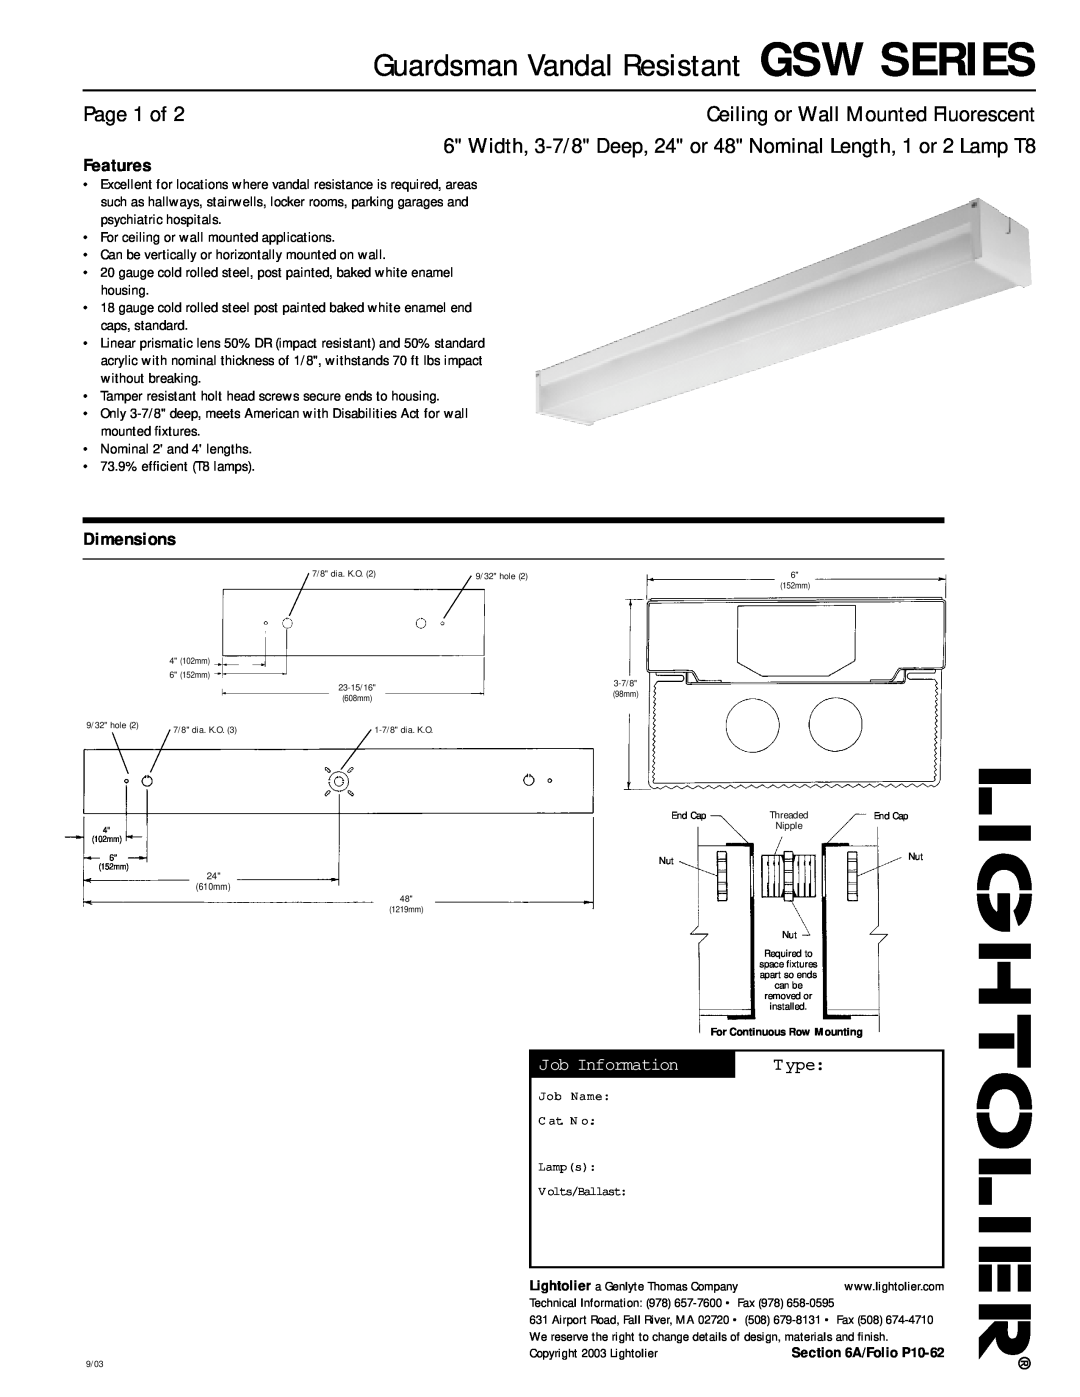 Lightolier dimensions Guardsman Vandal Resistant GSW SERIES, Page 1 of, Ceiling or Wall Mounted Fluorescent, Features 